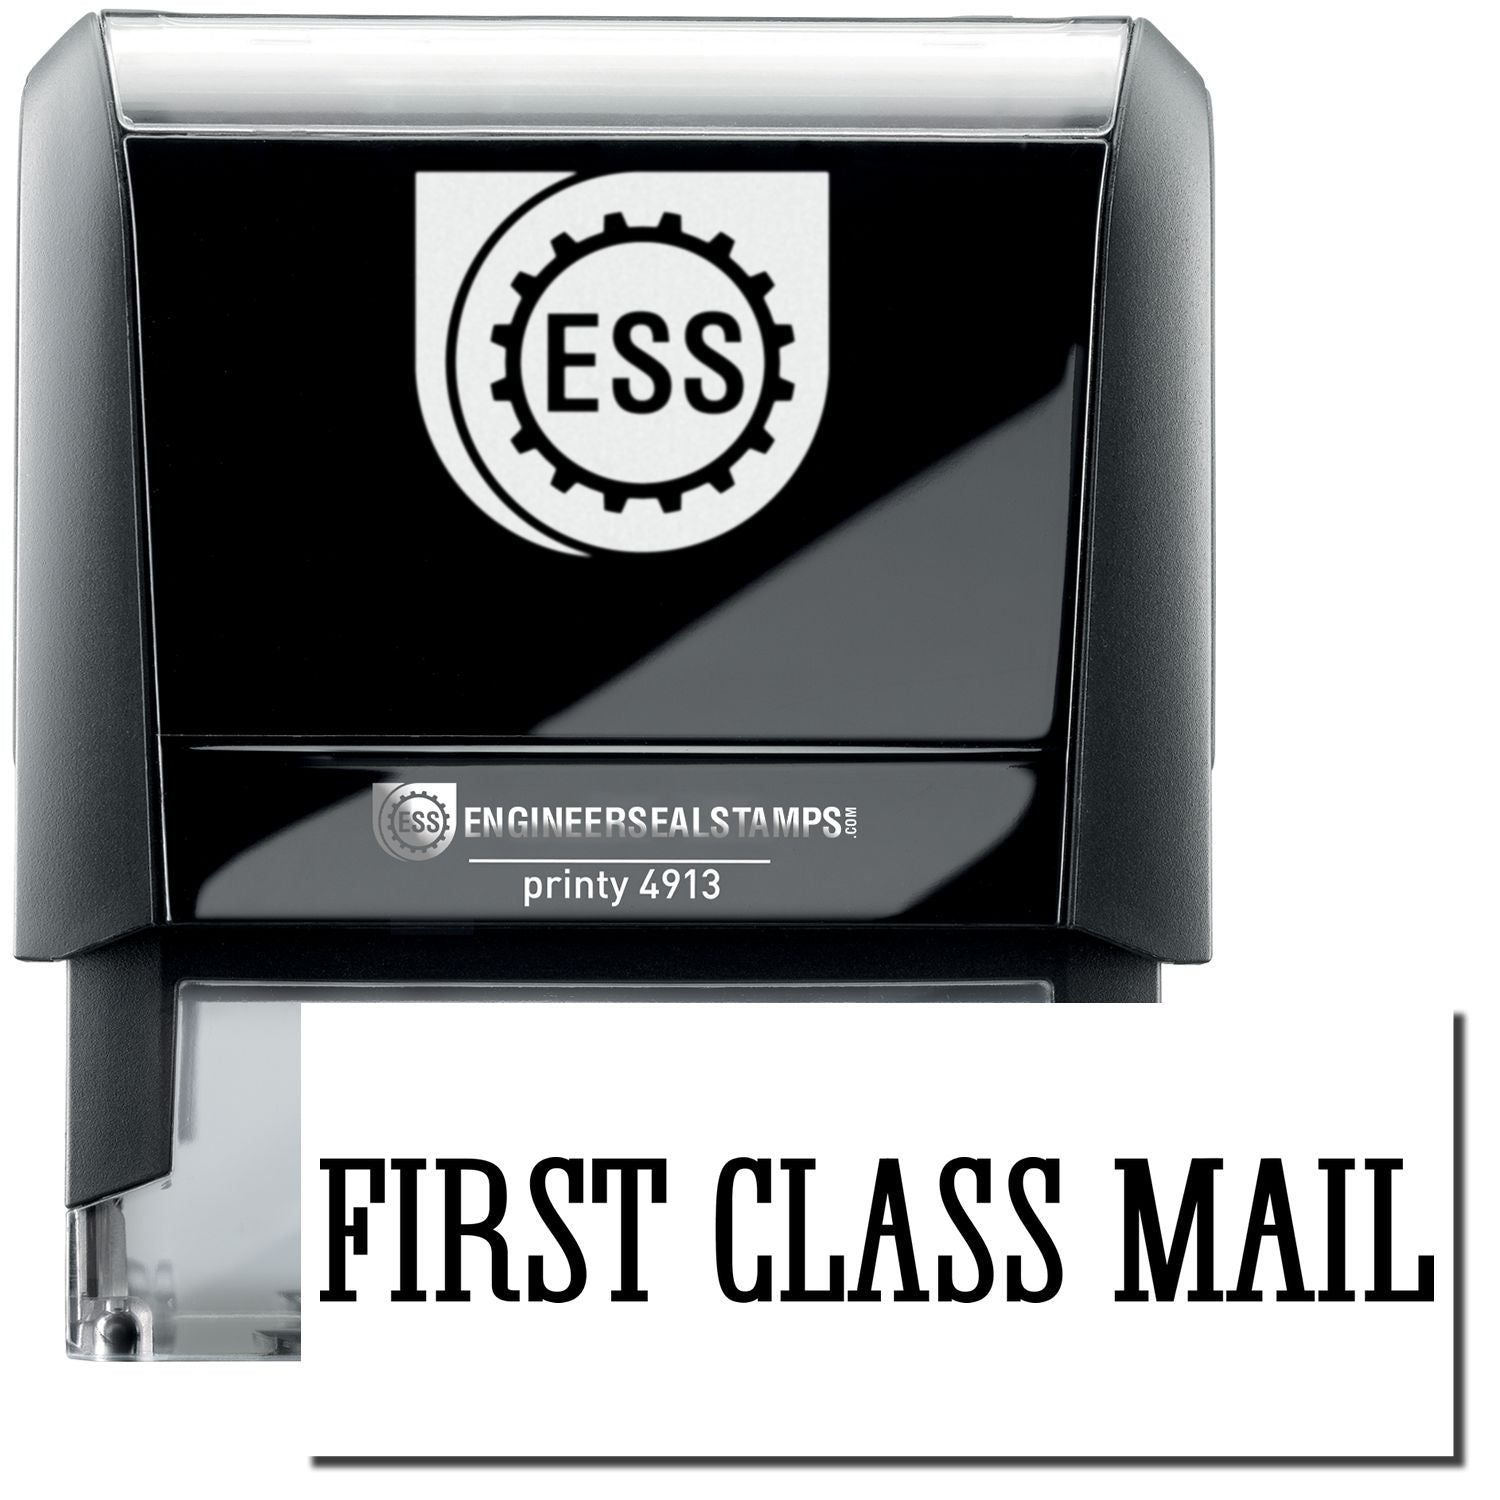 A self-inking stamp with a stamped image showing how the text "FIRST CLASS MAIL" in a large times font is displayed by it after stamping.